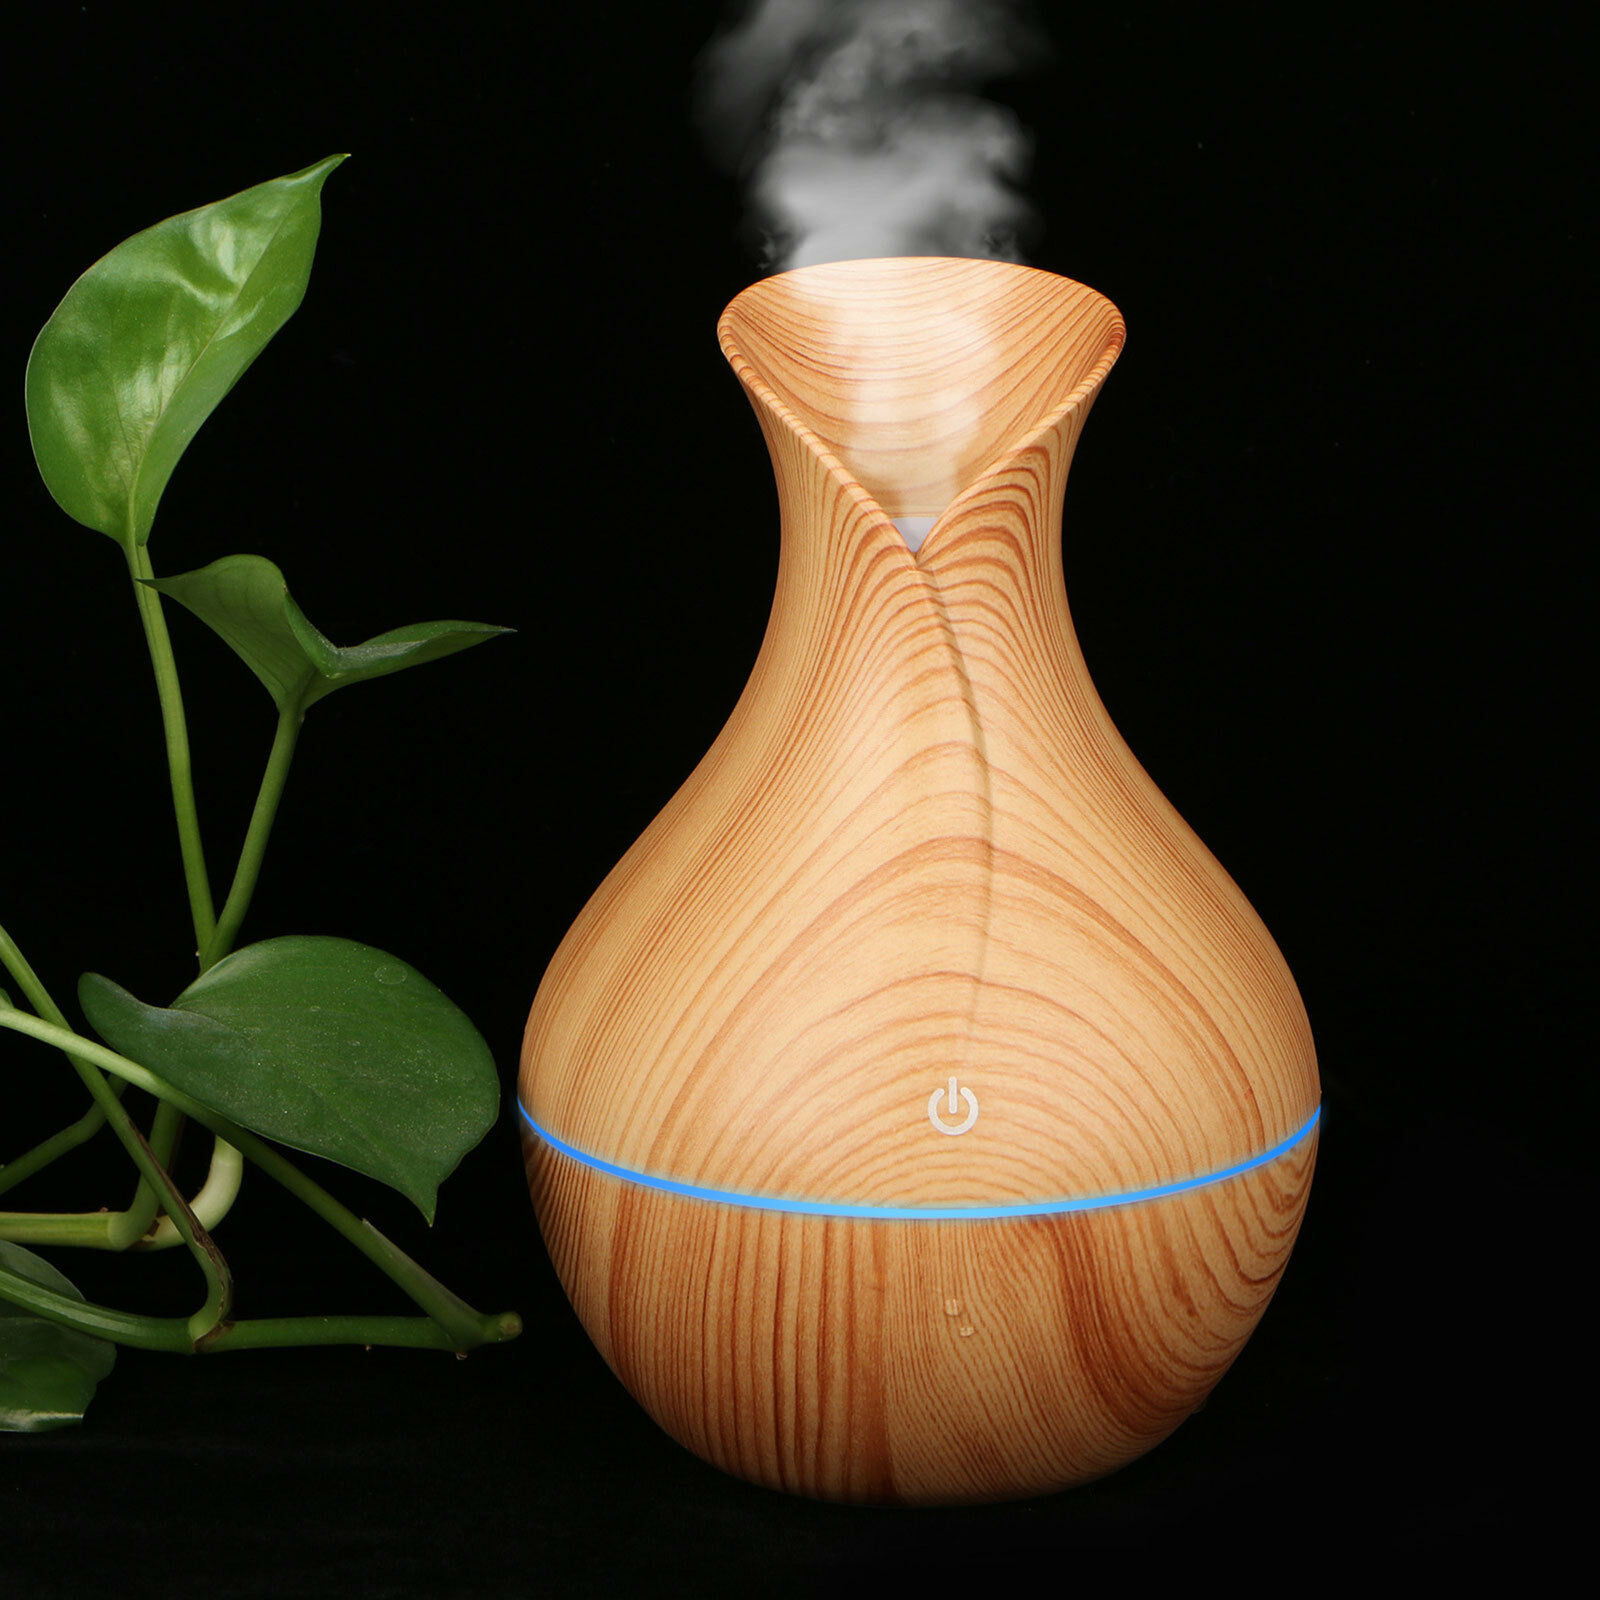 LED Light Ultrasonic Aromatherapy Mist Essential Oil Diffuser Humidifier 130 ml